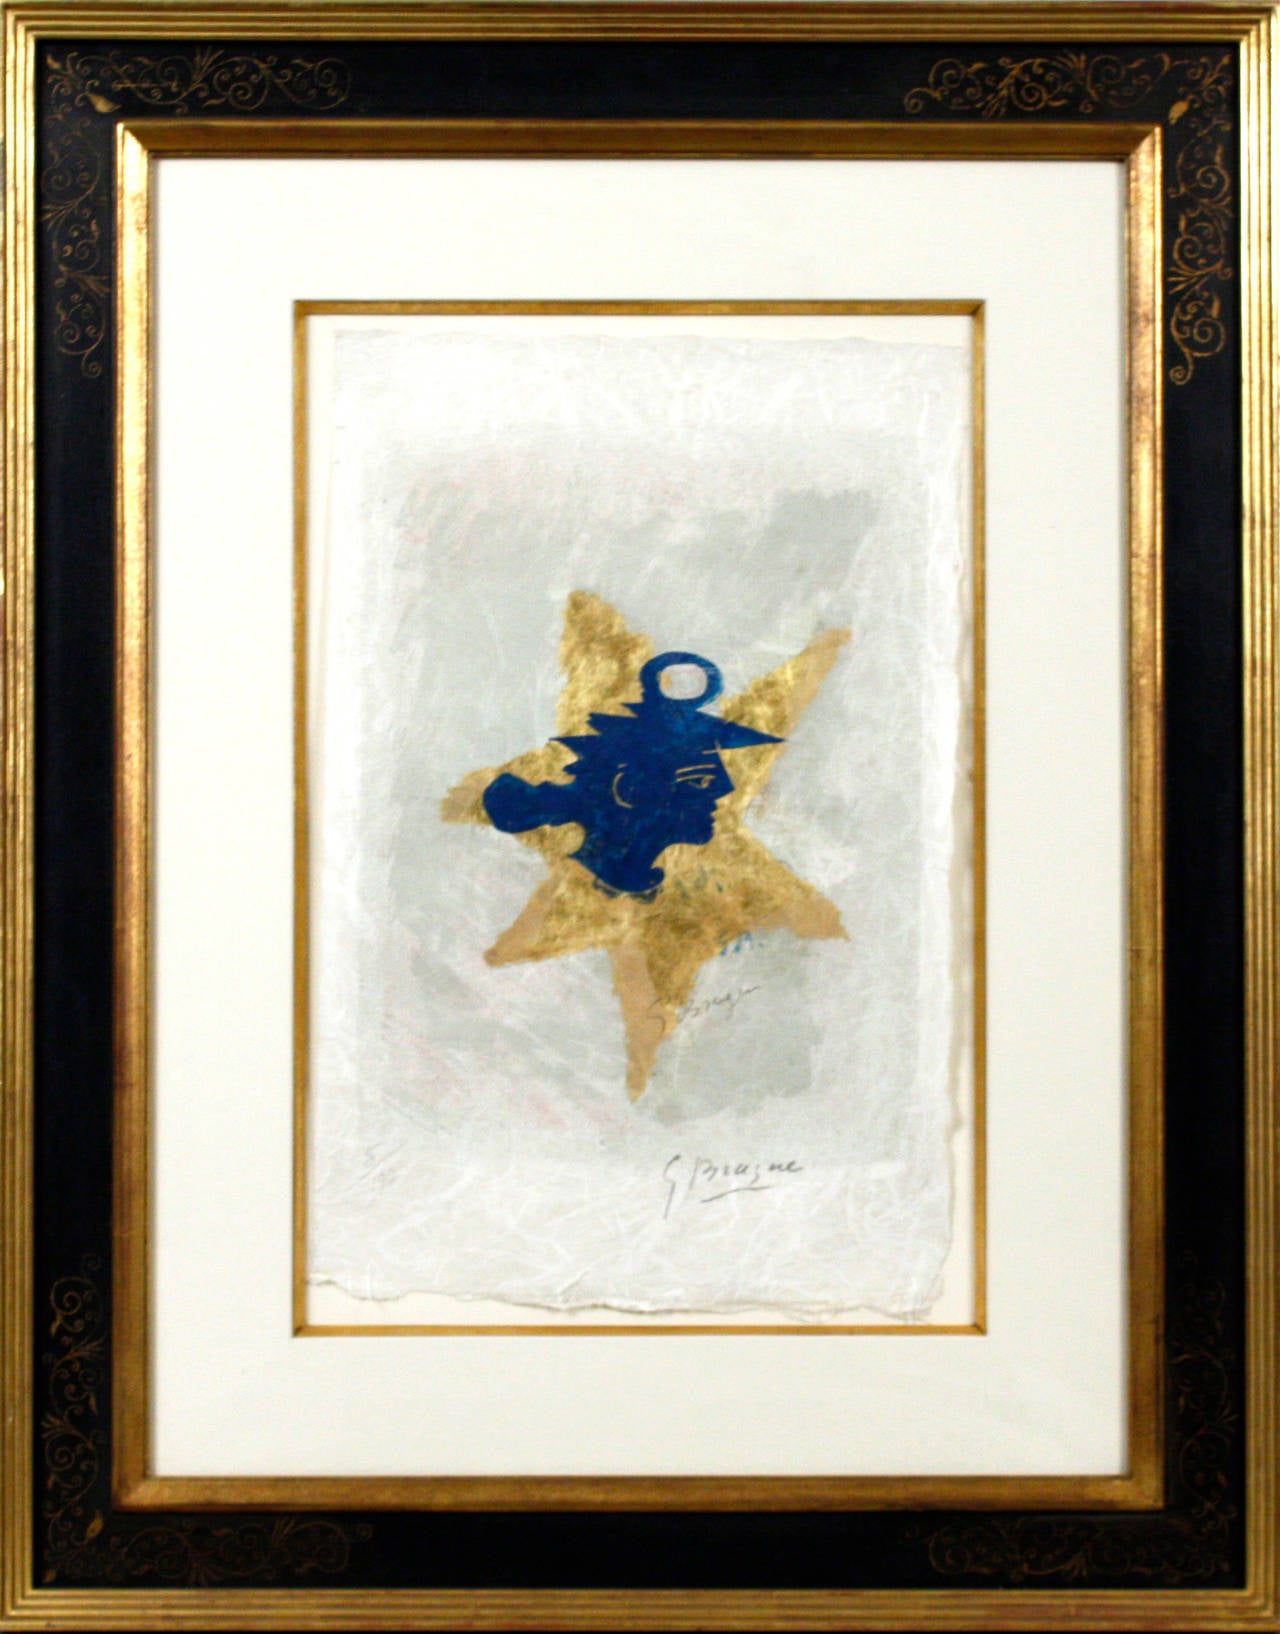 Tete Greque - Print by Georges Braque